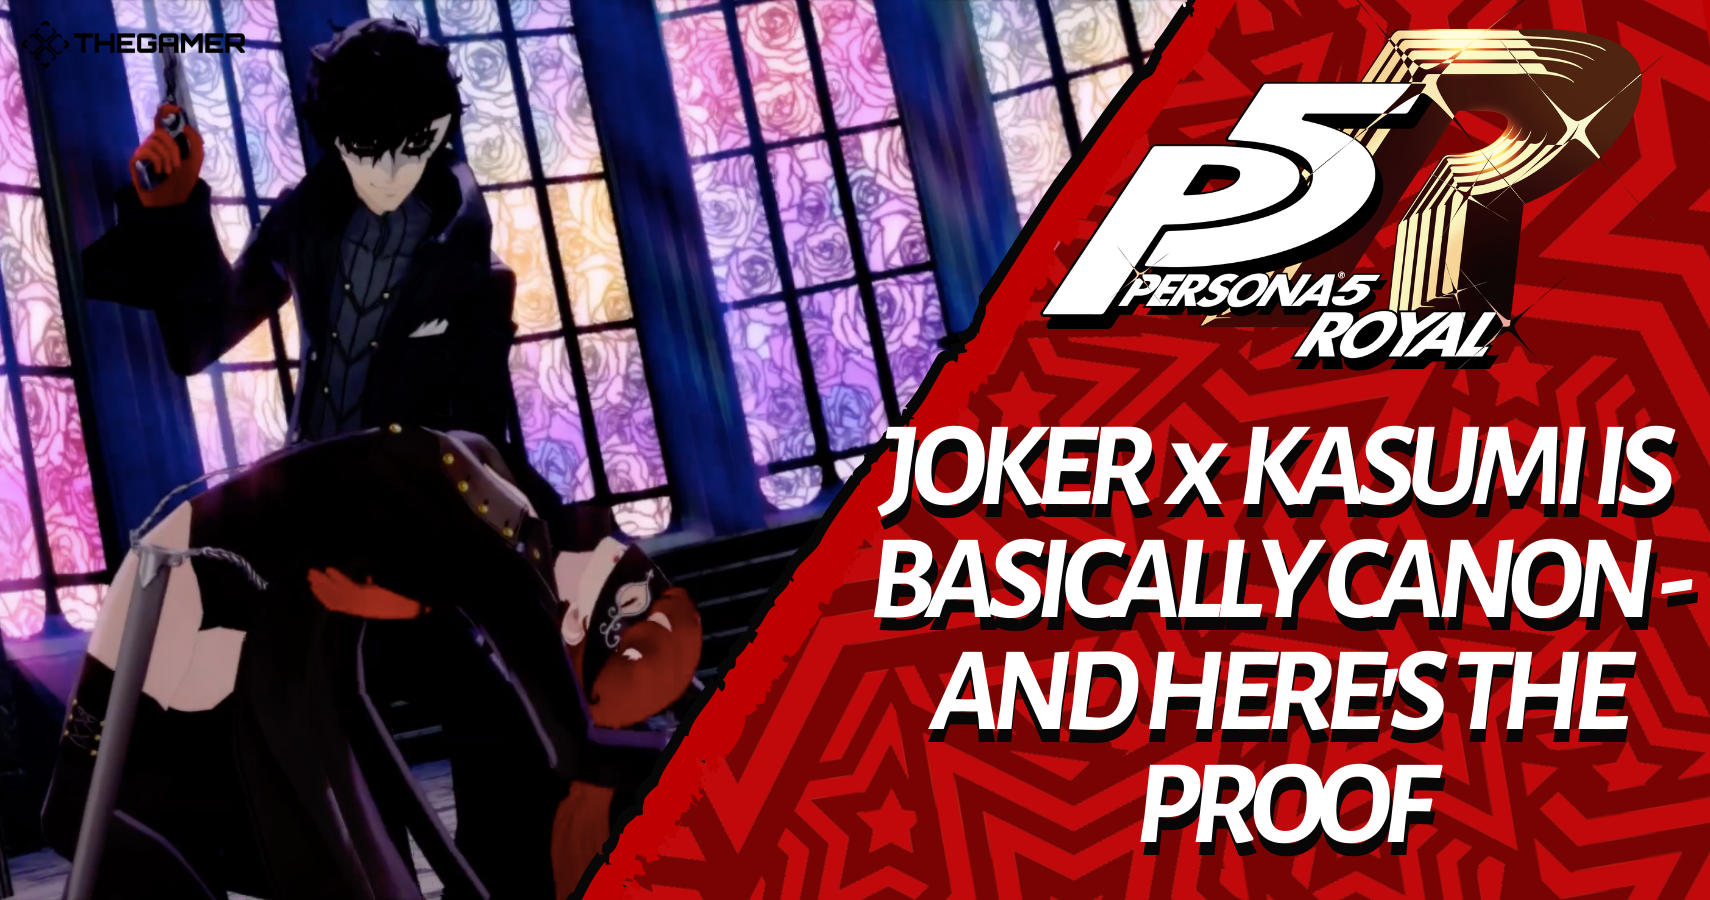 Persona 5 Royal: Joker x Kasumi Is Basically Canon - And Here's The Proof